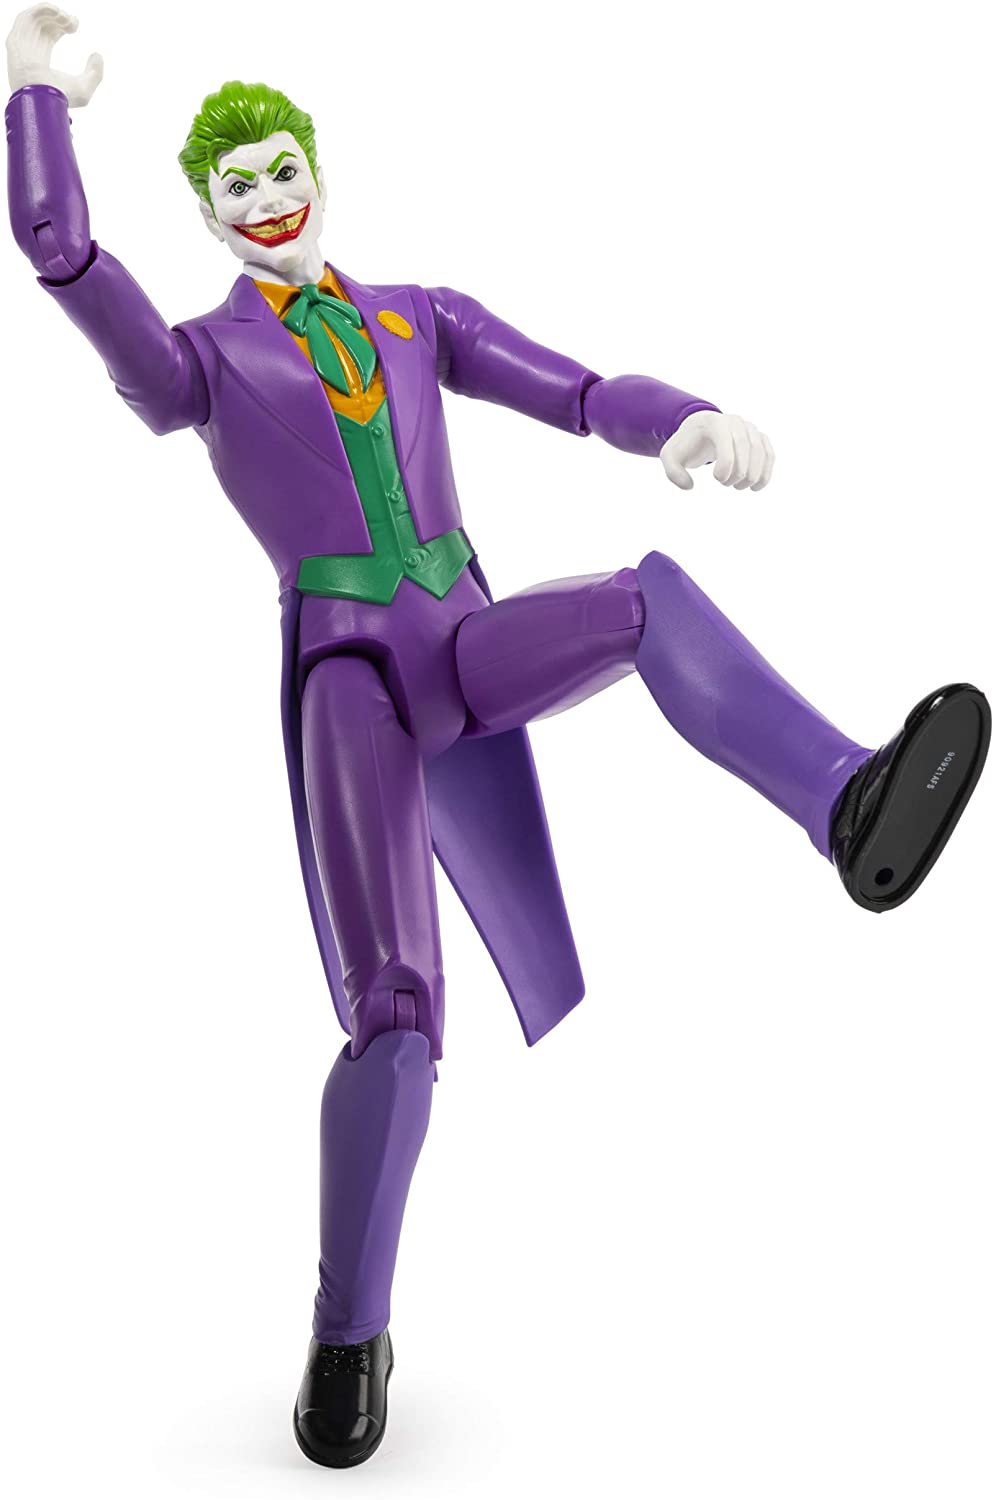 BATMAN, 12-Inch THE JOKER Action Figure Toy, Kids Toys for Boys Aged 3 and up